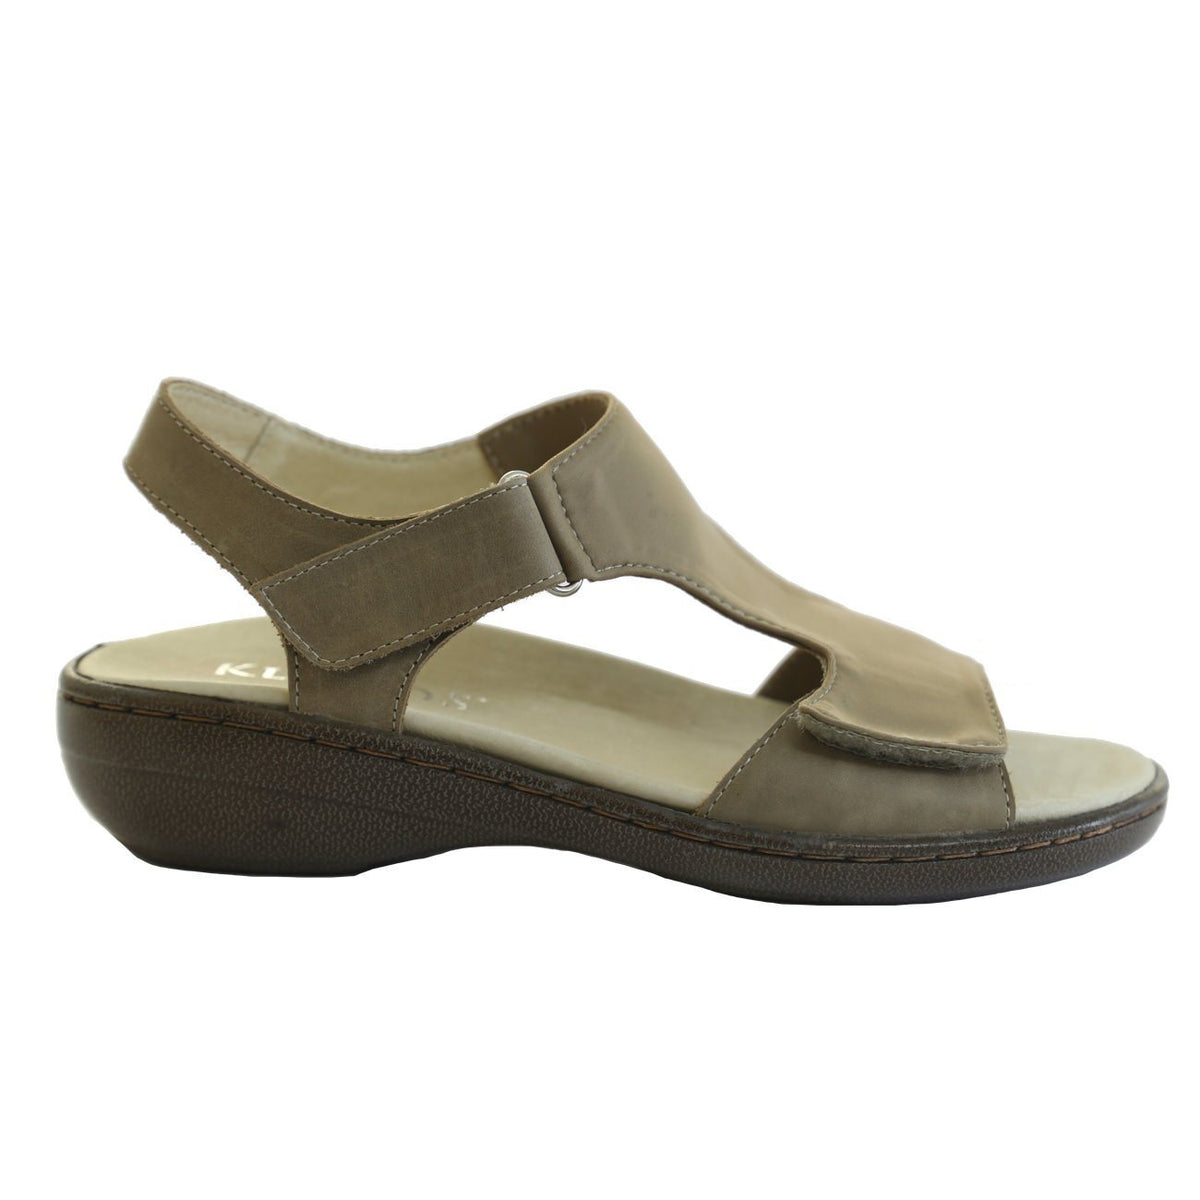 Klouds, Adele Stretch, Sandal, Leather, Stone Sandals Klouds 